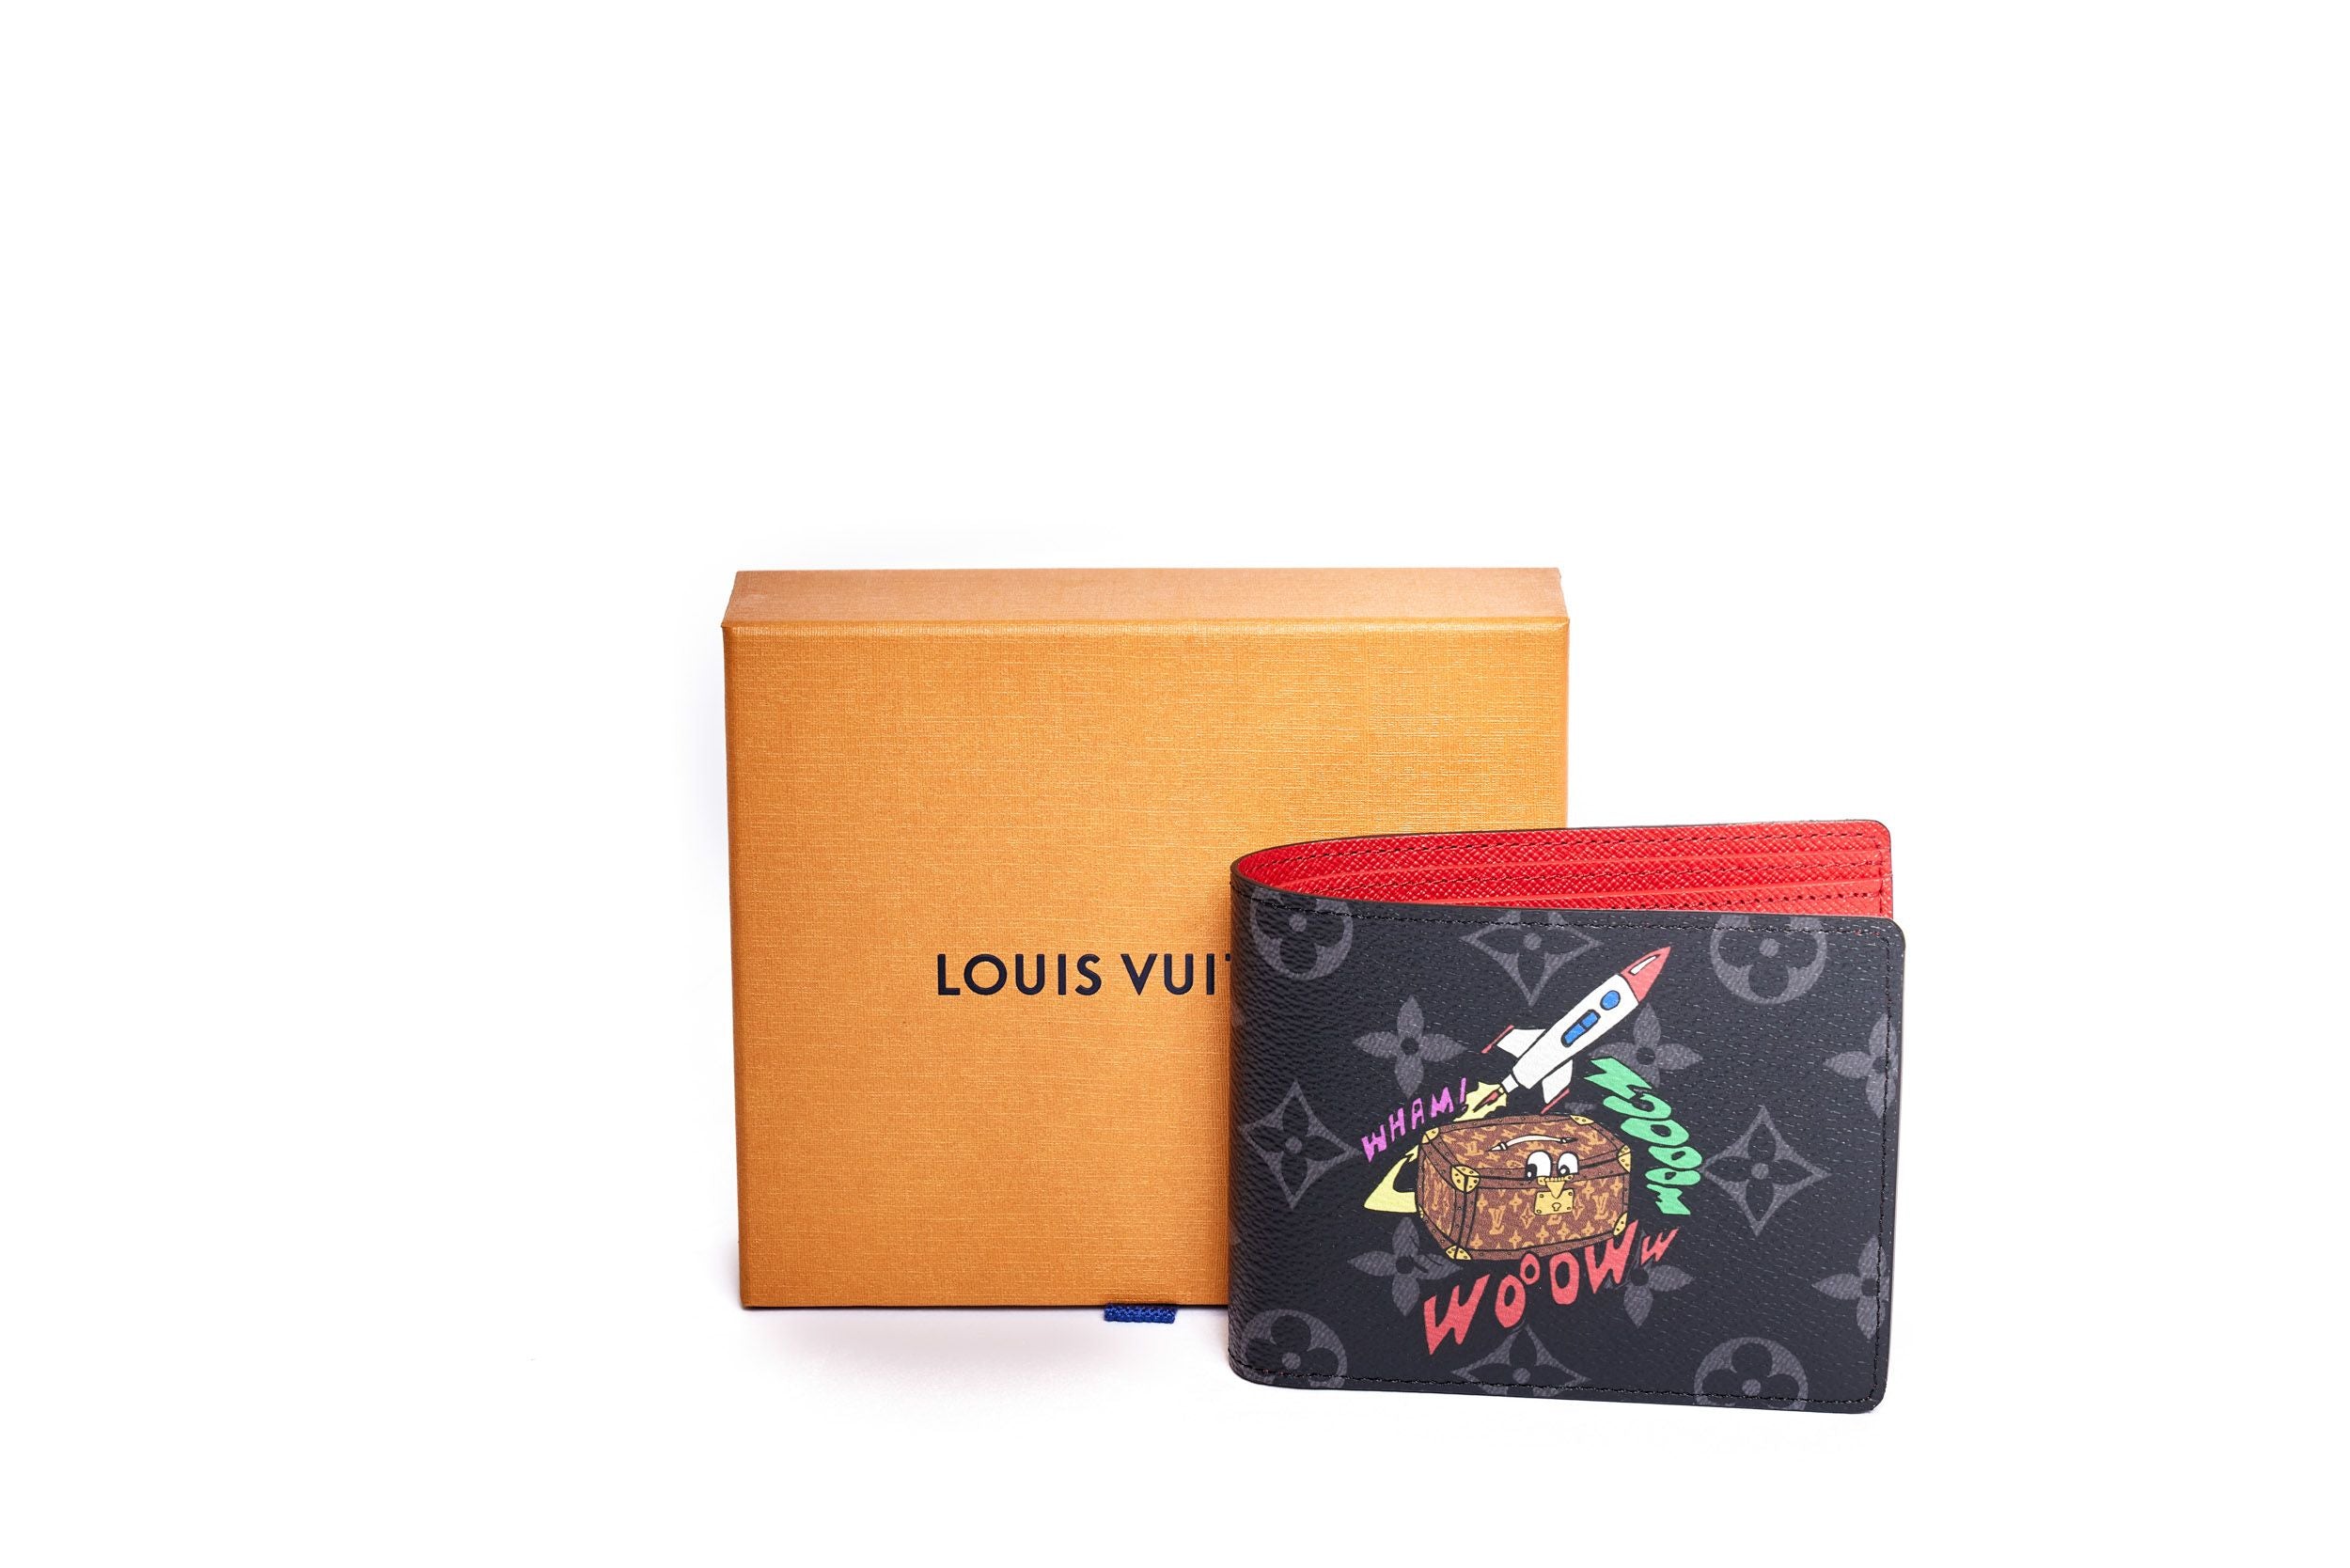 Products by Louis Vuitton: Multiple Wallet